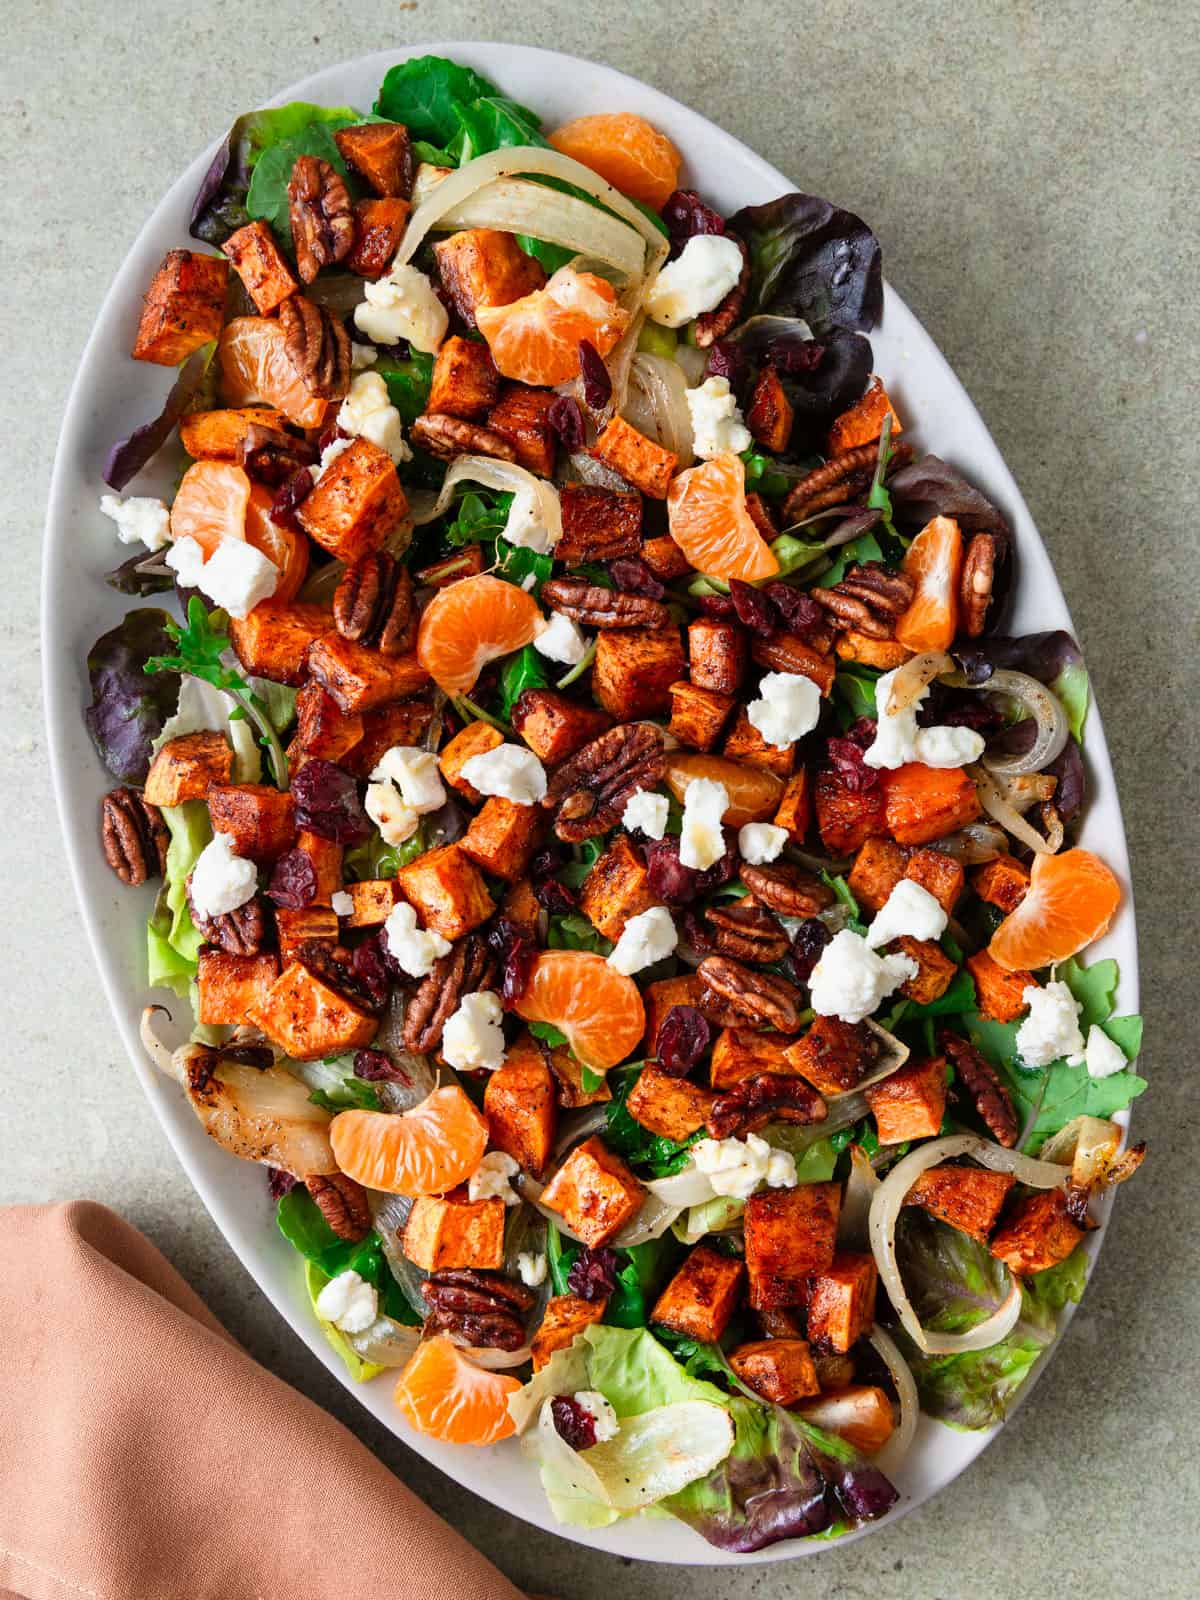 Fall sweet potato salad is layered with citrus, candied pecans and creamy goat cheese.